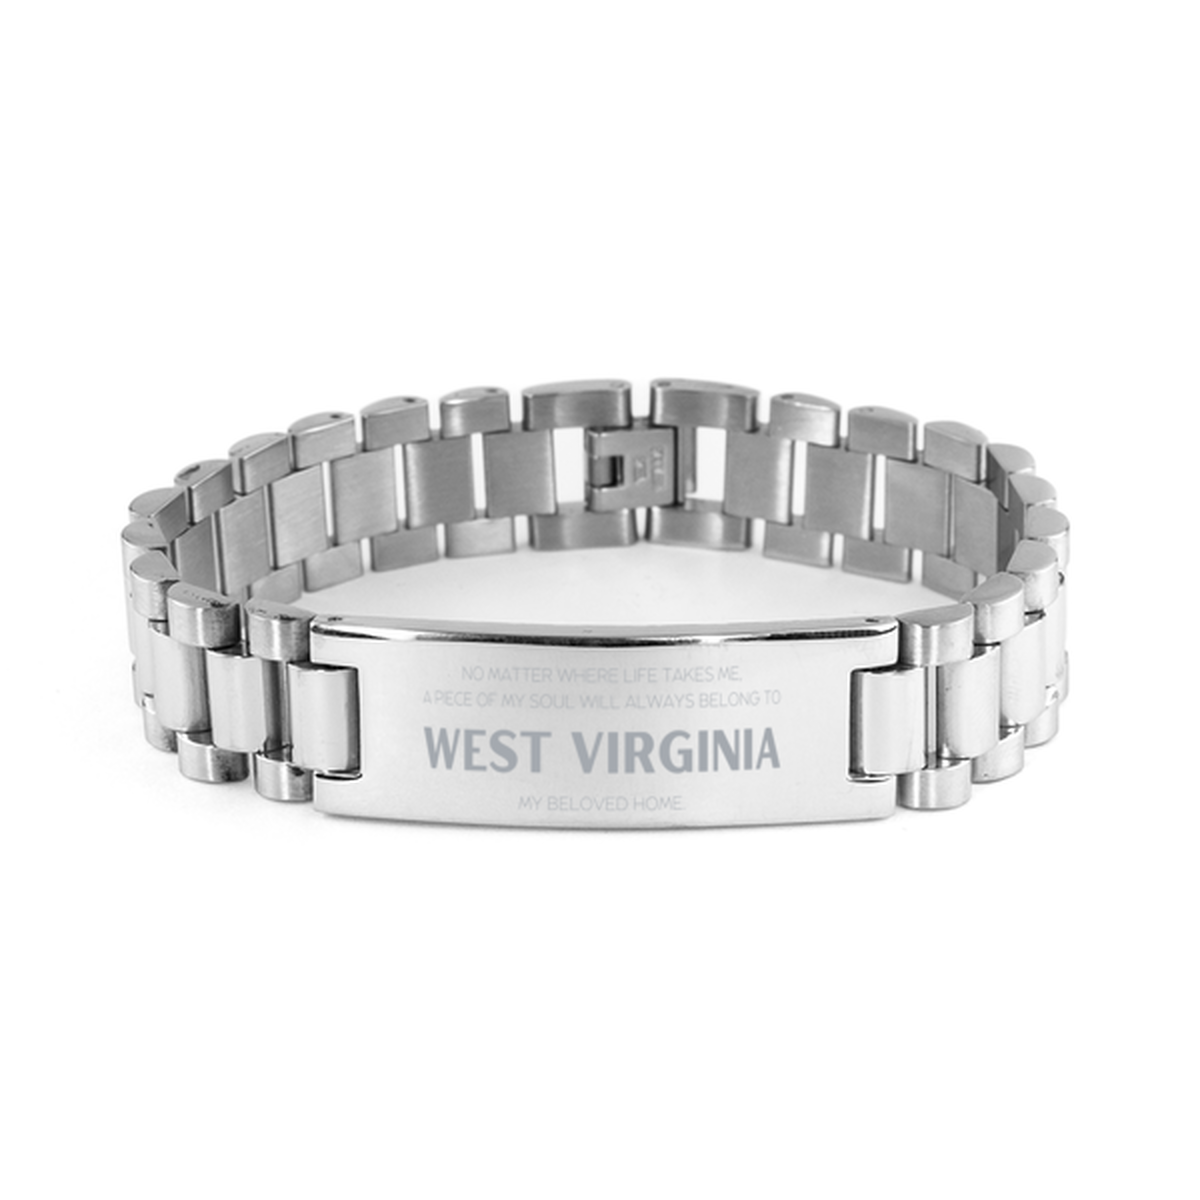 Love West Virginia State Gifts, My soul will always belong to West Virginia, Proud Ladder Stainless Steel Bracelet, Birthday Unique Gifts For West Virginia Men, Women, Friends